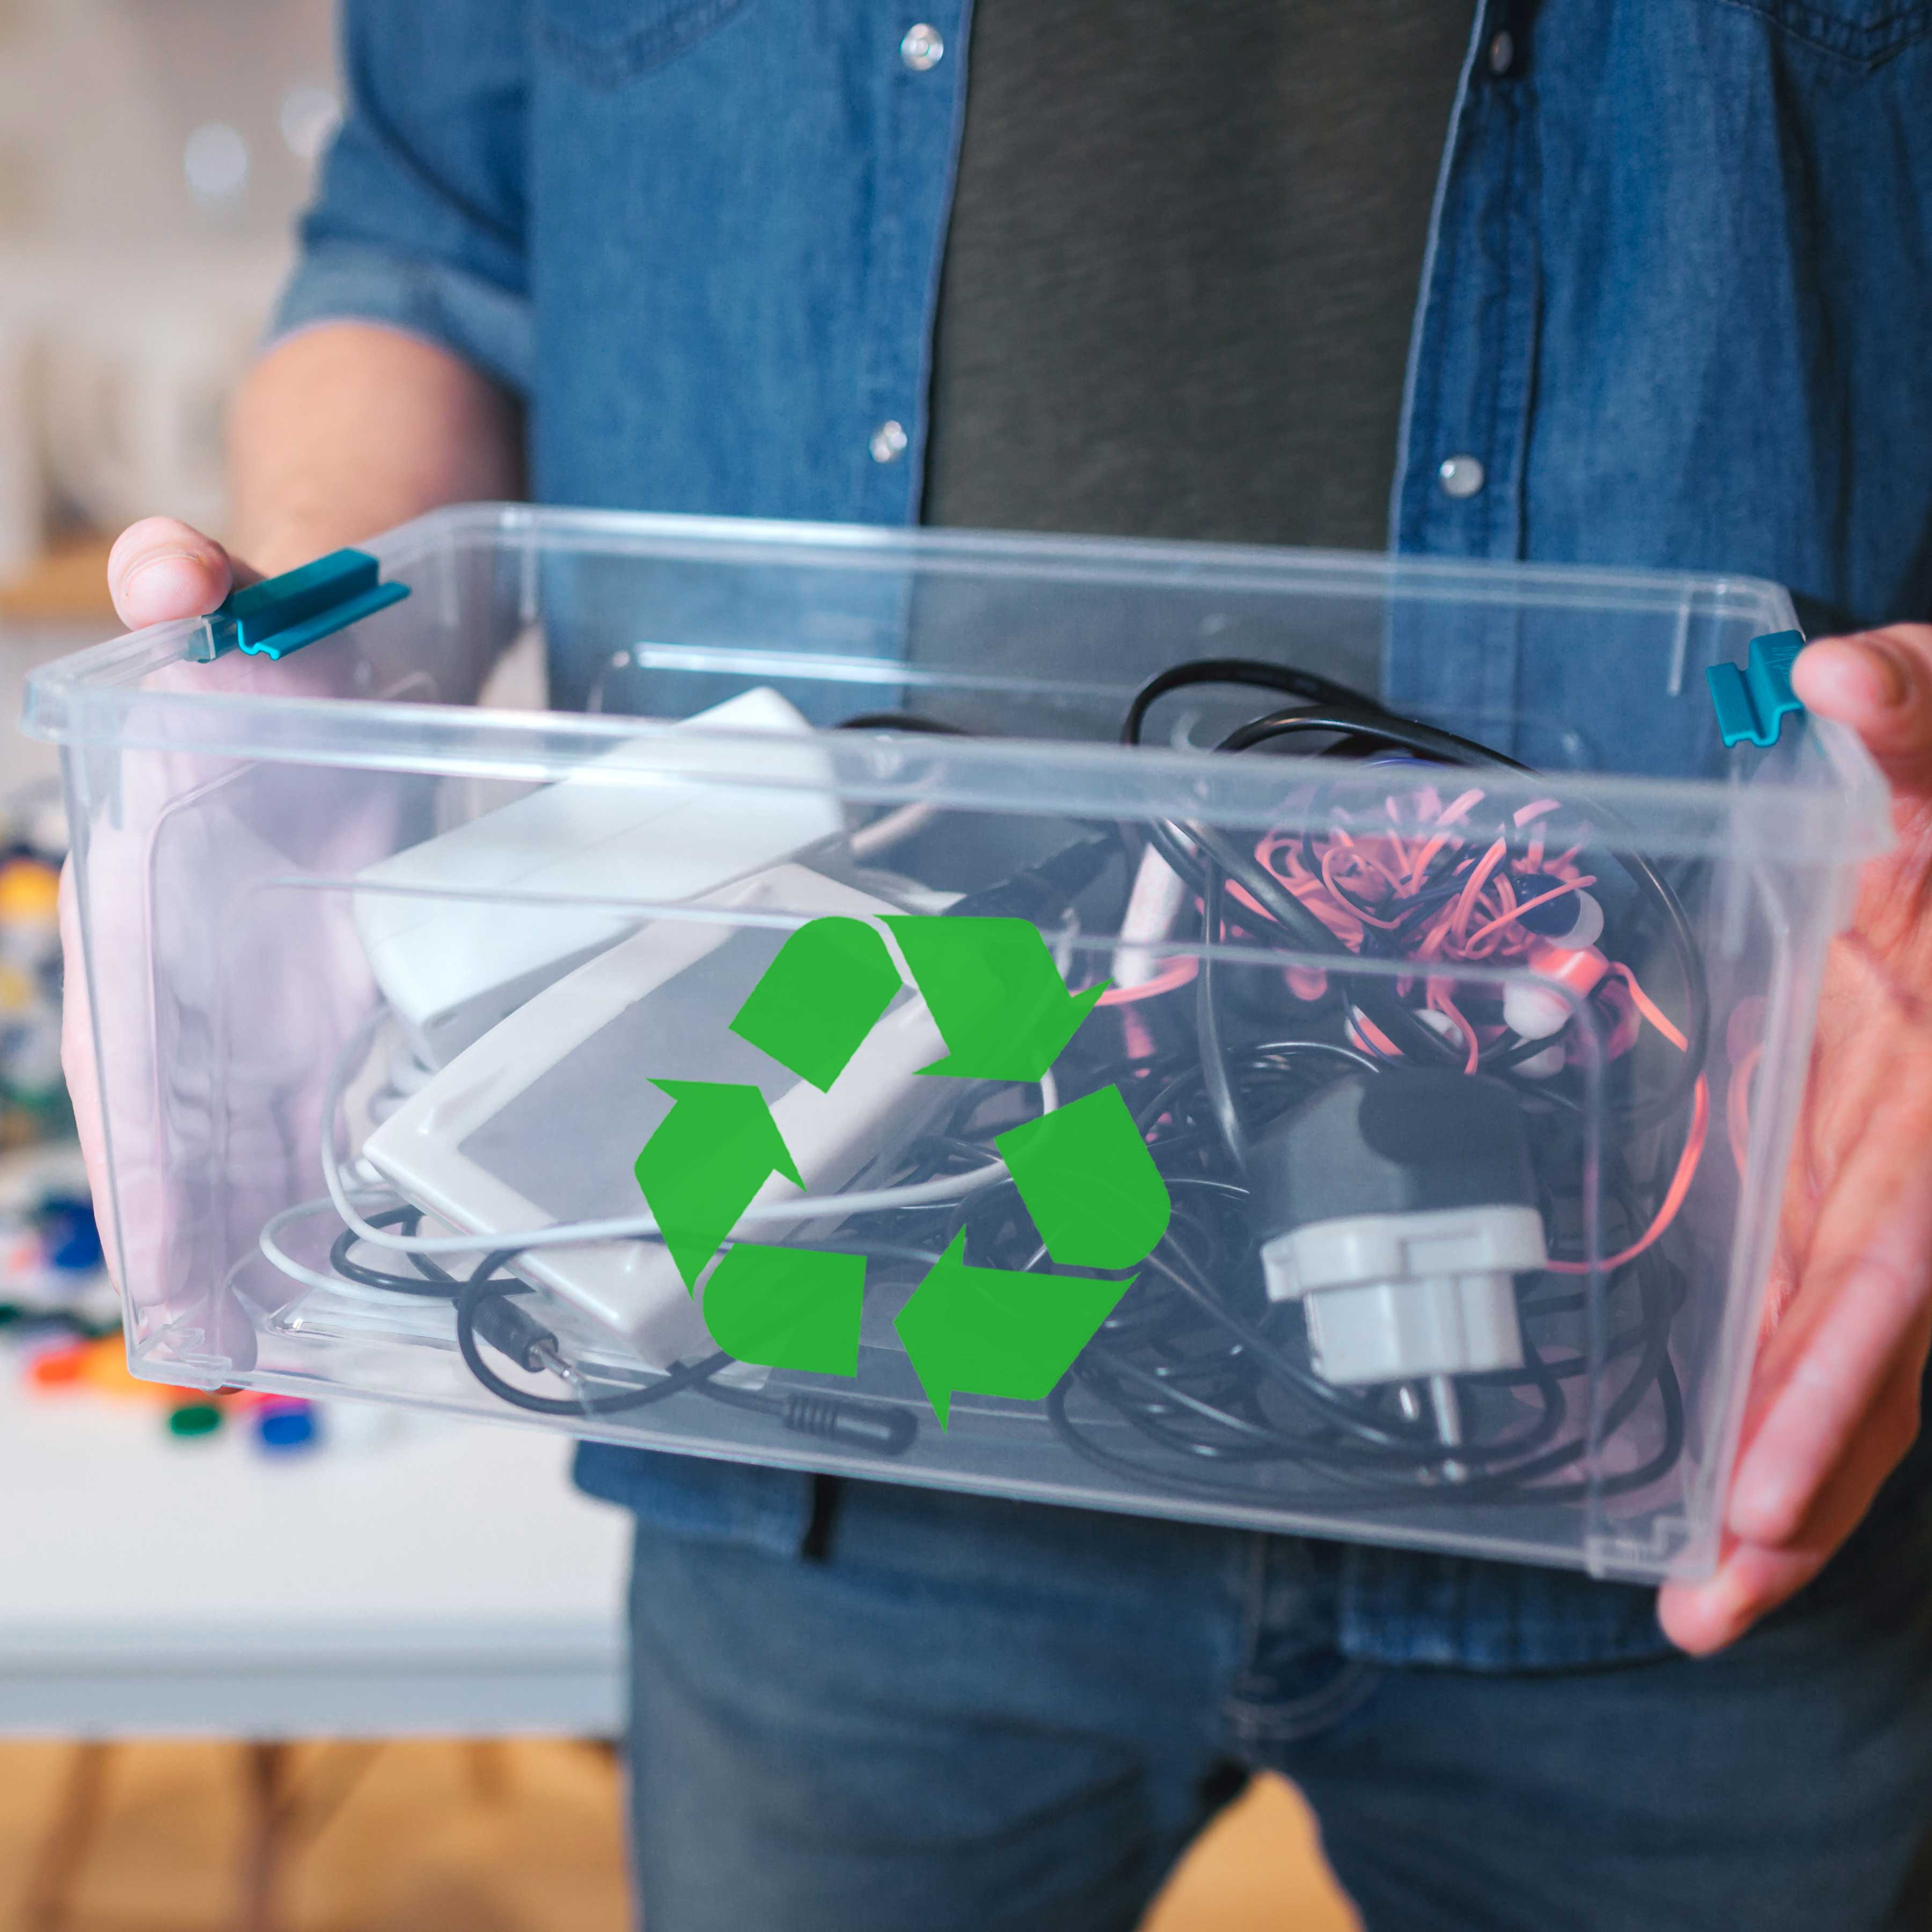 Stock Image, Photography Website, Electronics Recycling, 1:1 3600